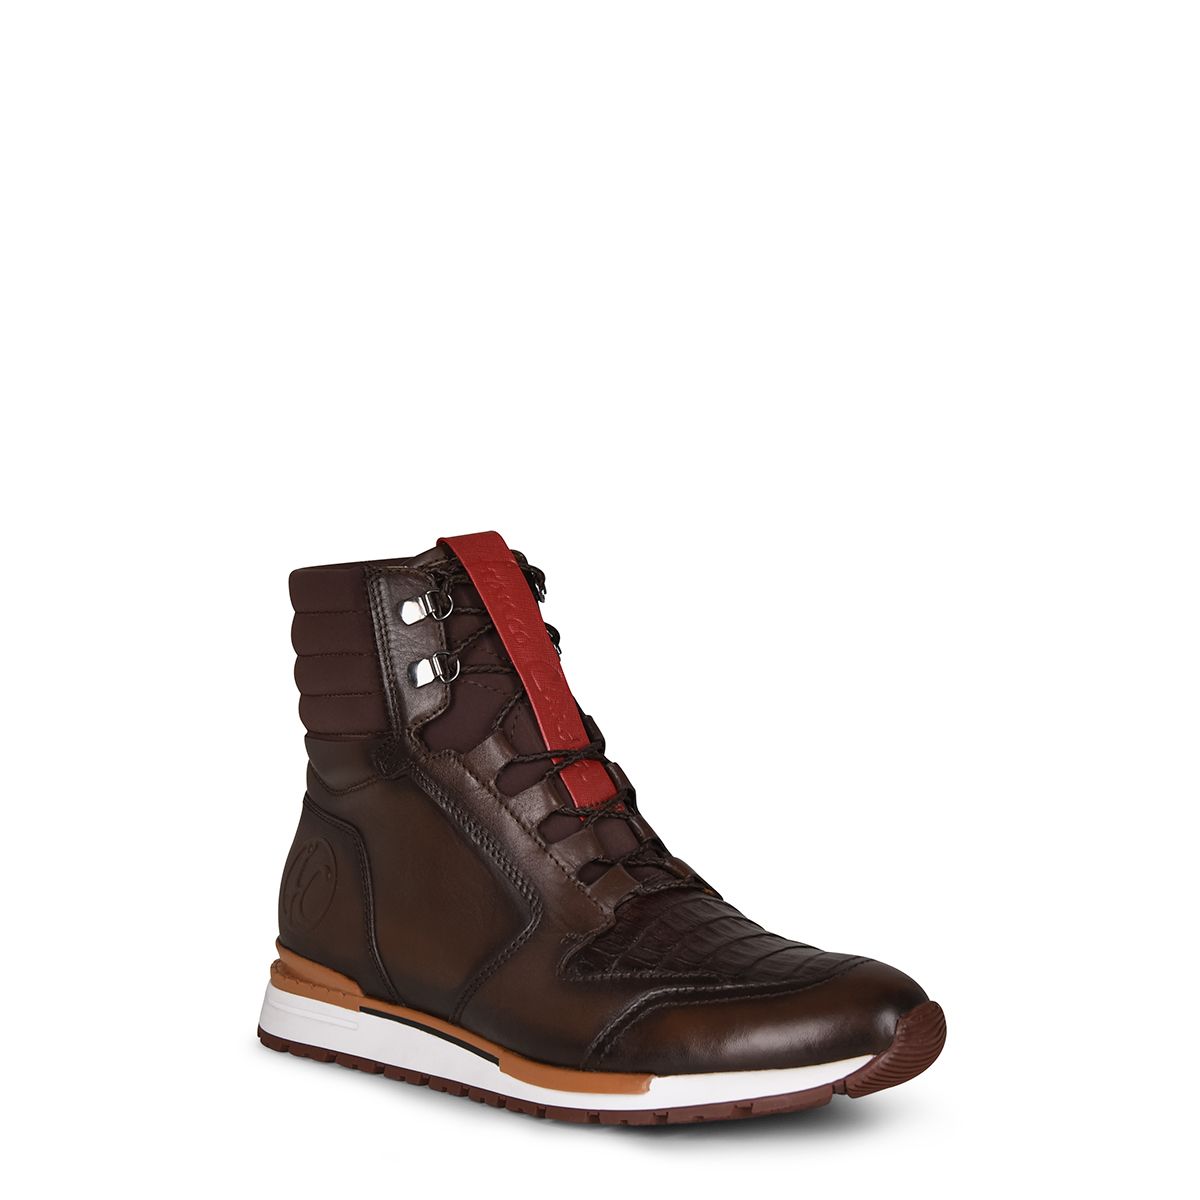 N48CWTS - Cuadra brown casual fashion caiman leather sneaker boots for men-Kuet.us